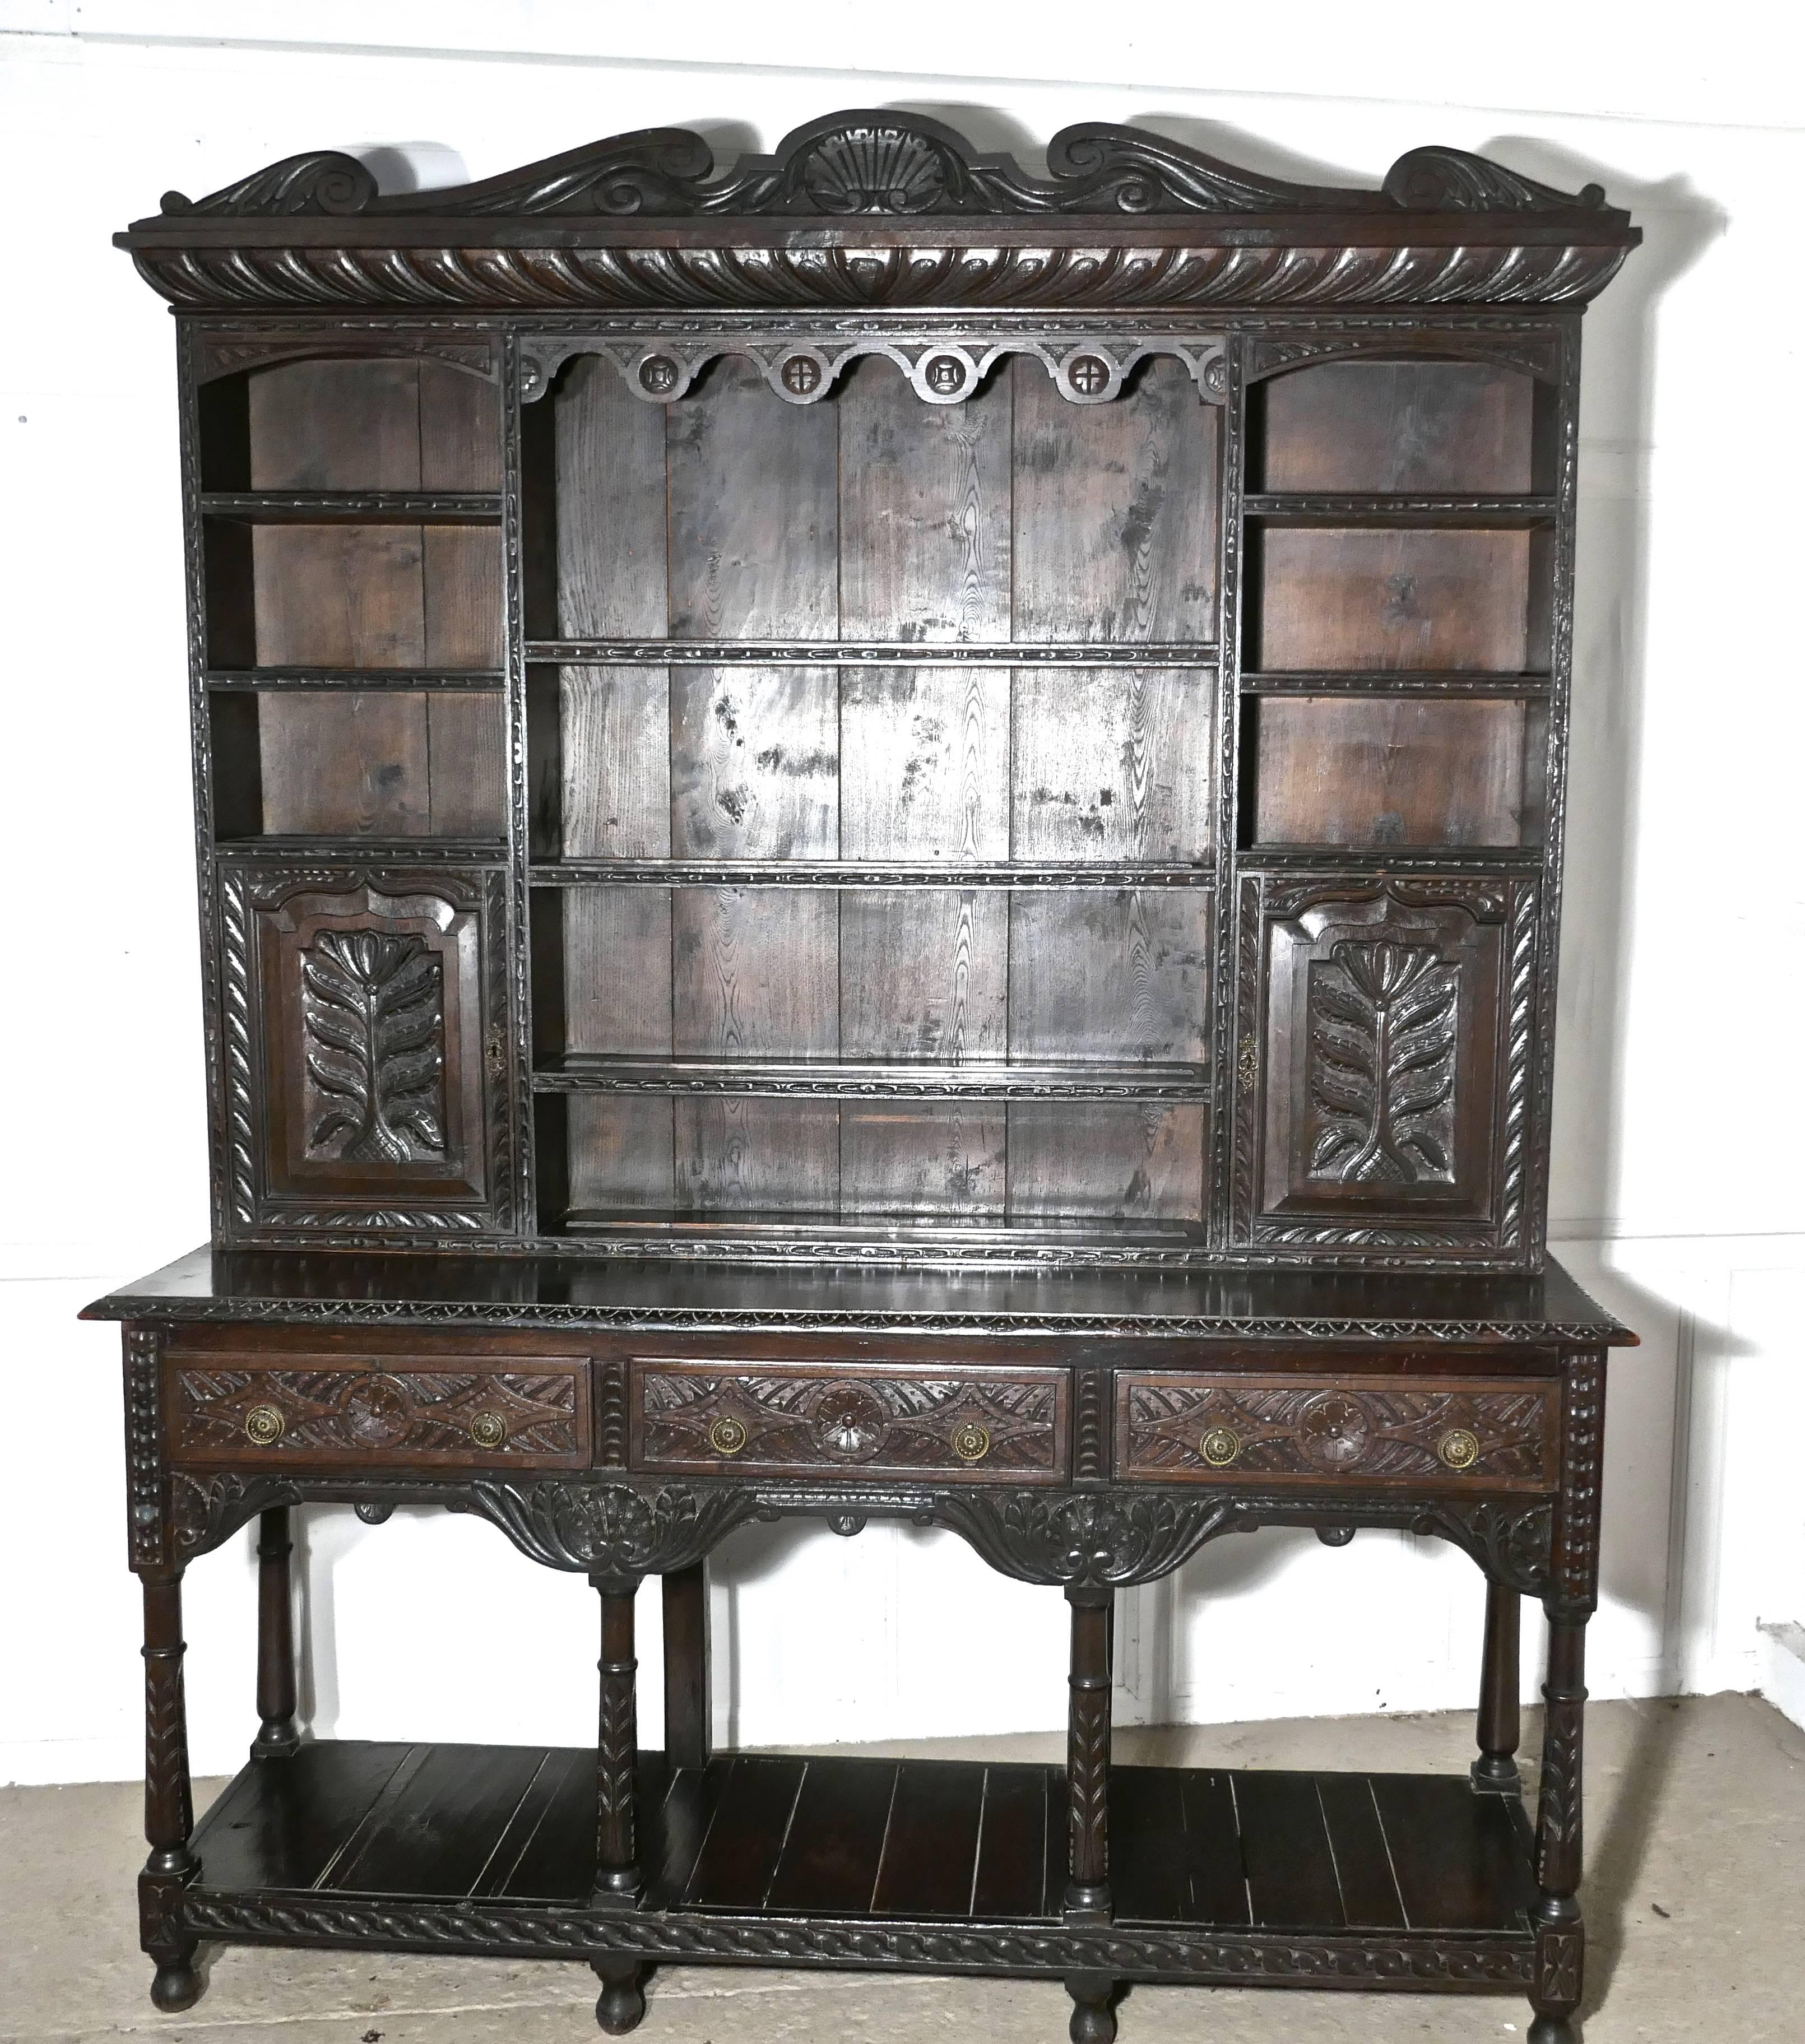 This is a superb and unusually large piece of Period Oak Furniture, the top section has central long shelves bordered by smaller shelves and small lockable cupboards
The shelves all have a carved edge and a plate rail and each of the doors of the